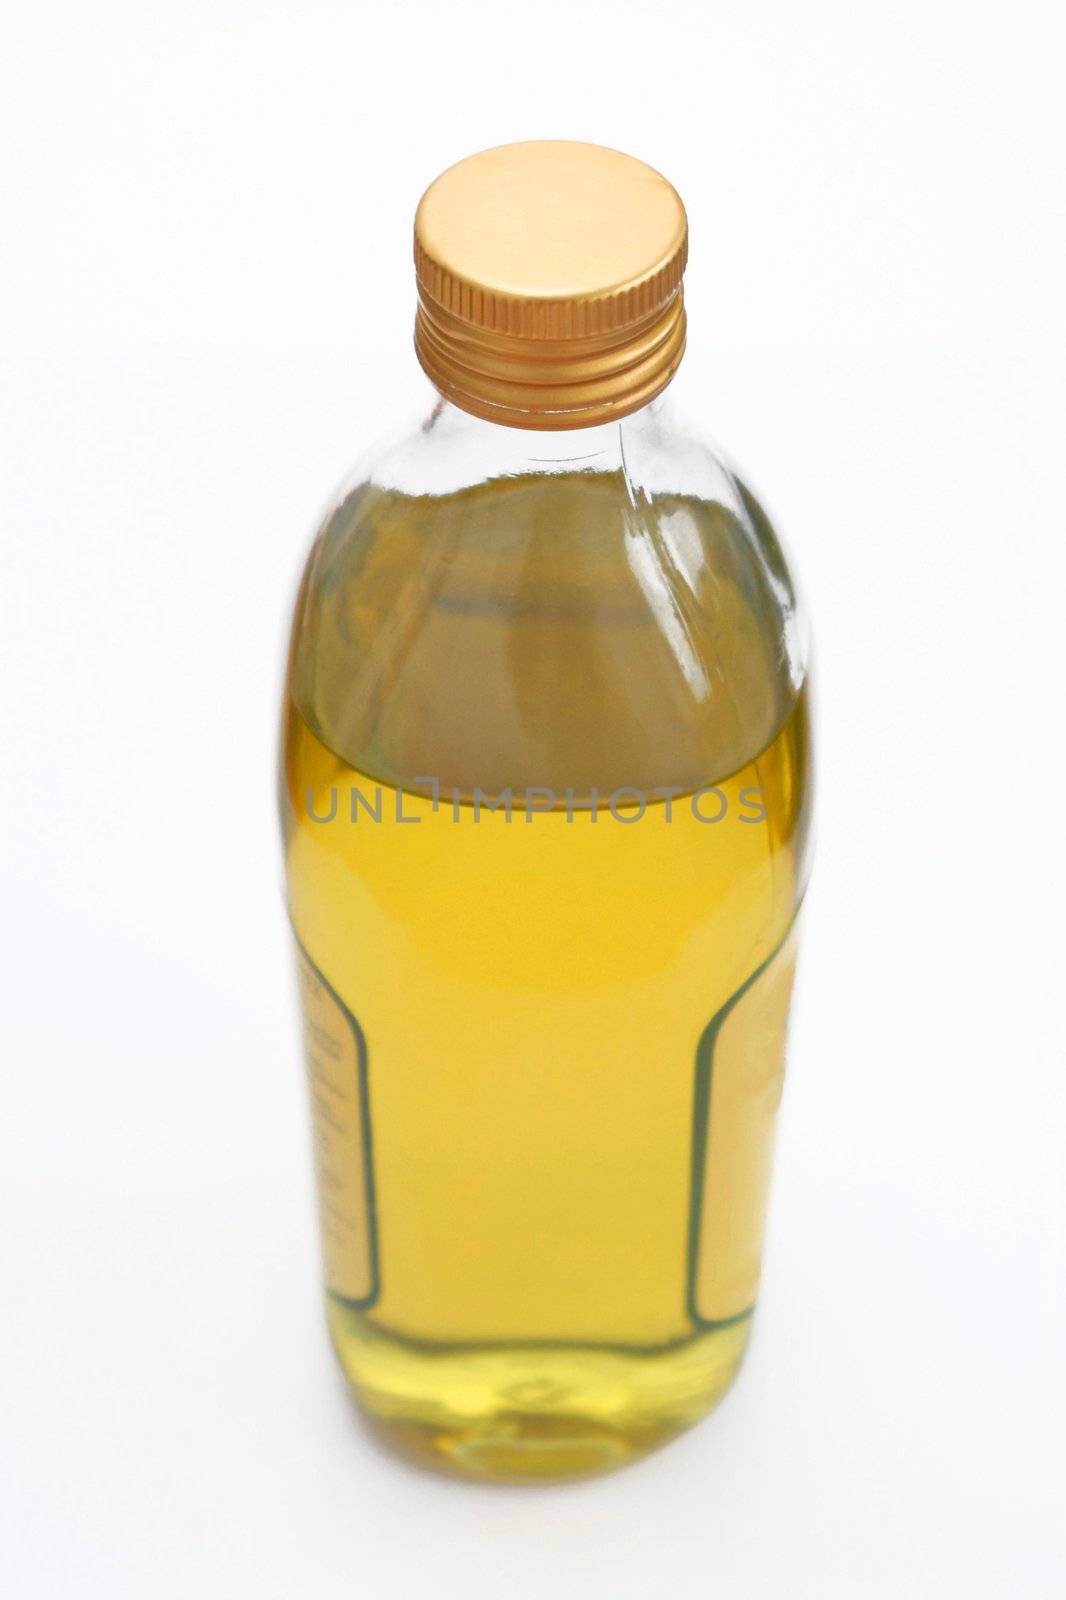 A bottle of oil on the white background